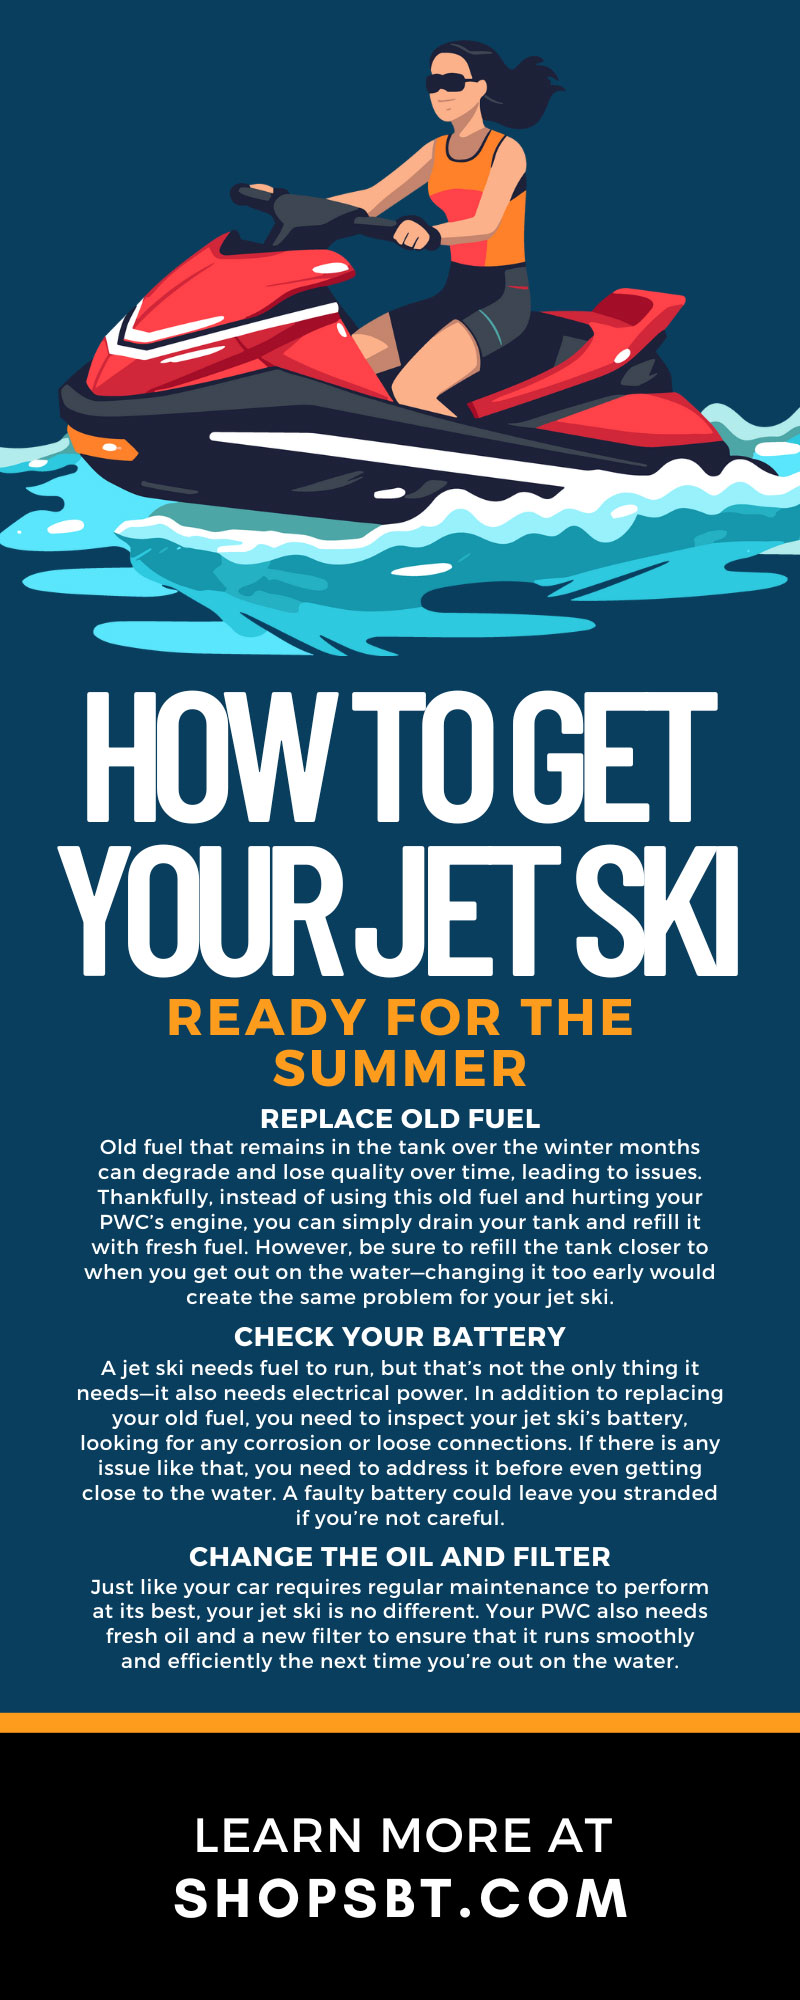 How To Get Your Jet Ski Ready for the Summer